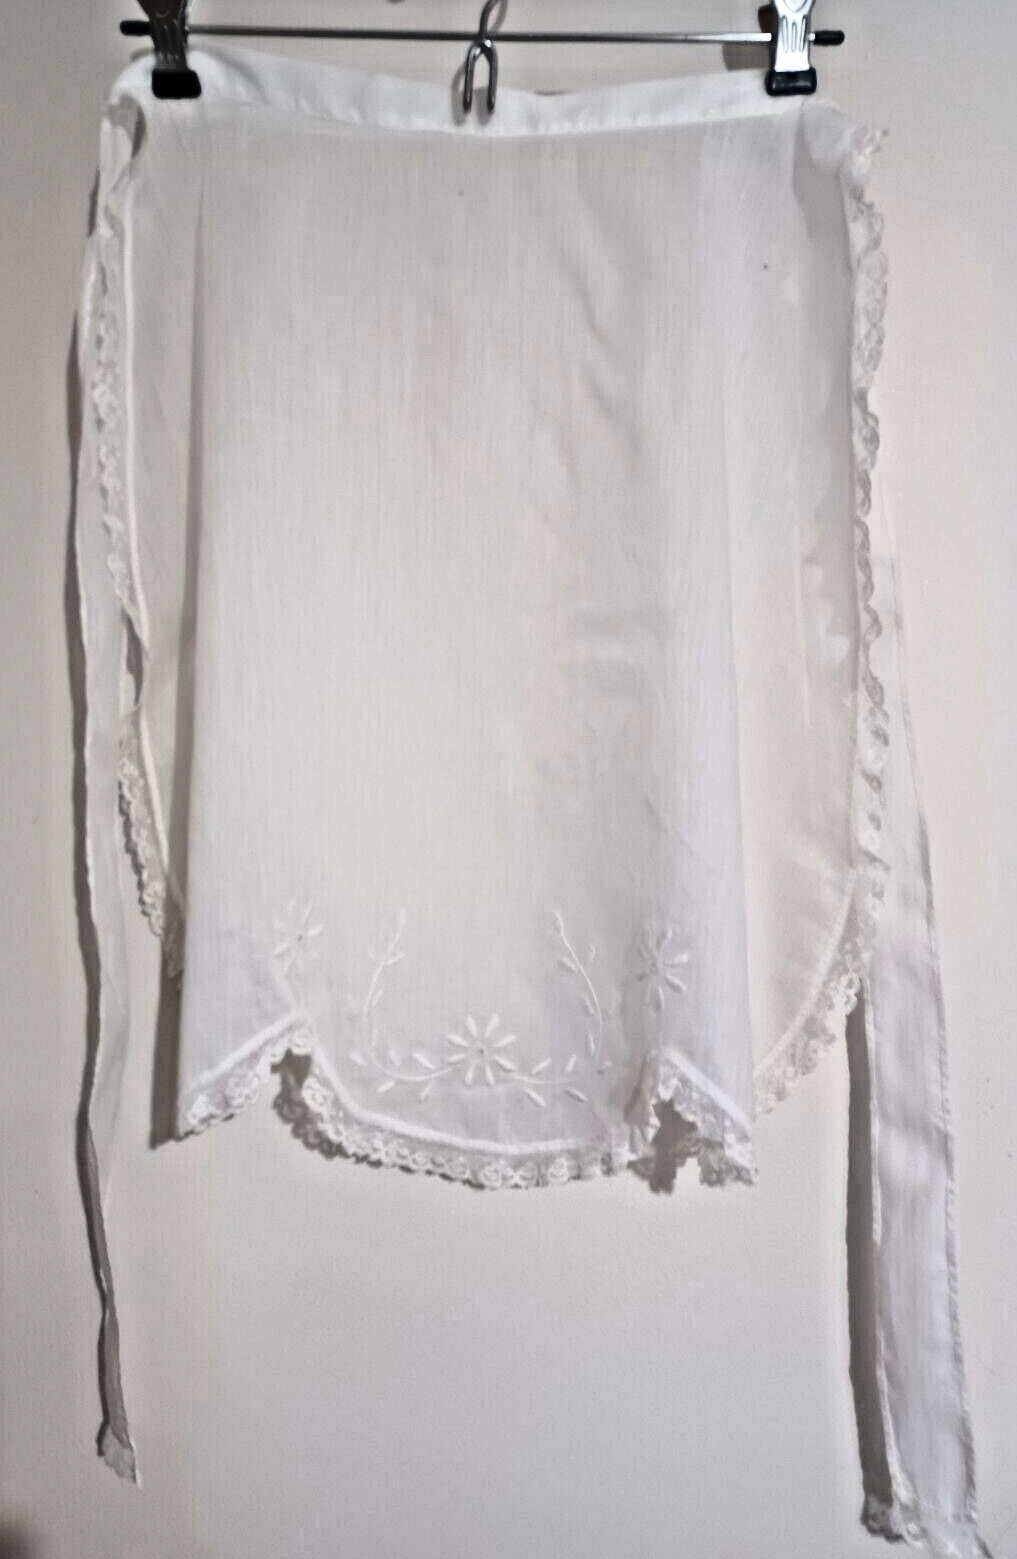 VINTAGE WHITE HOSTESS HALF APRON w/ EMBROIDERED DAISIES AND LACE TRIM